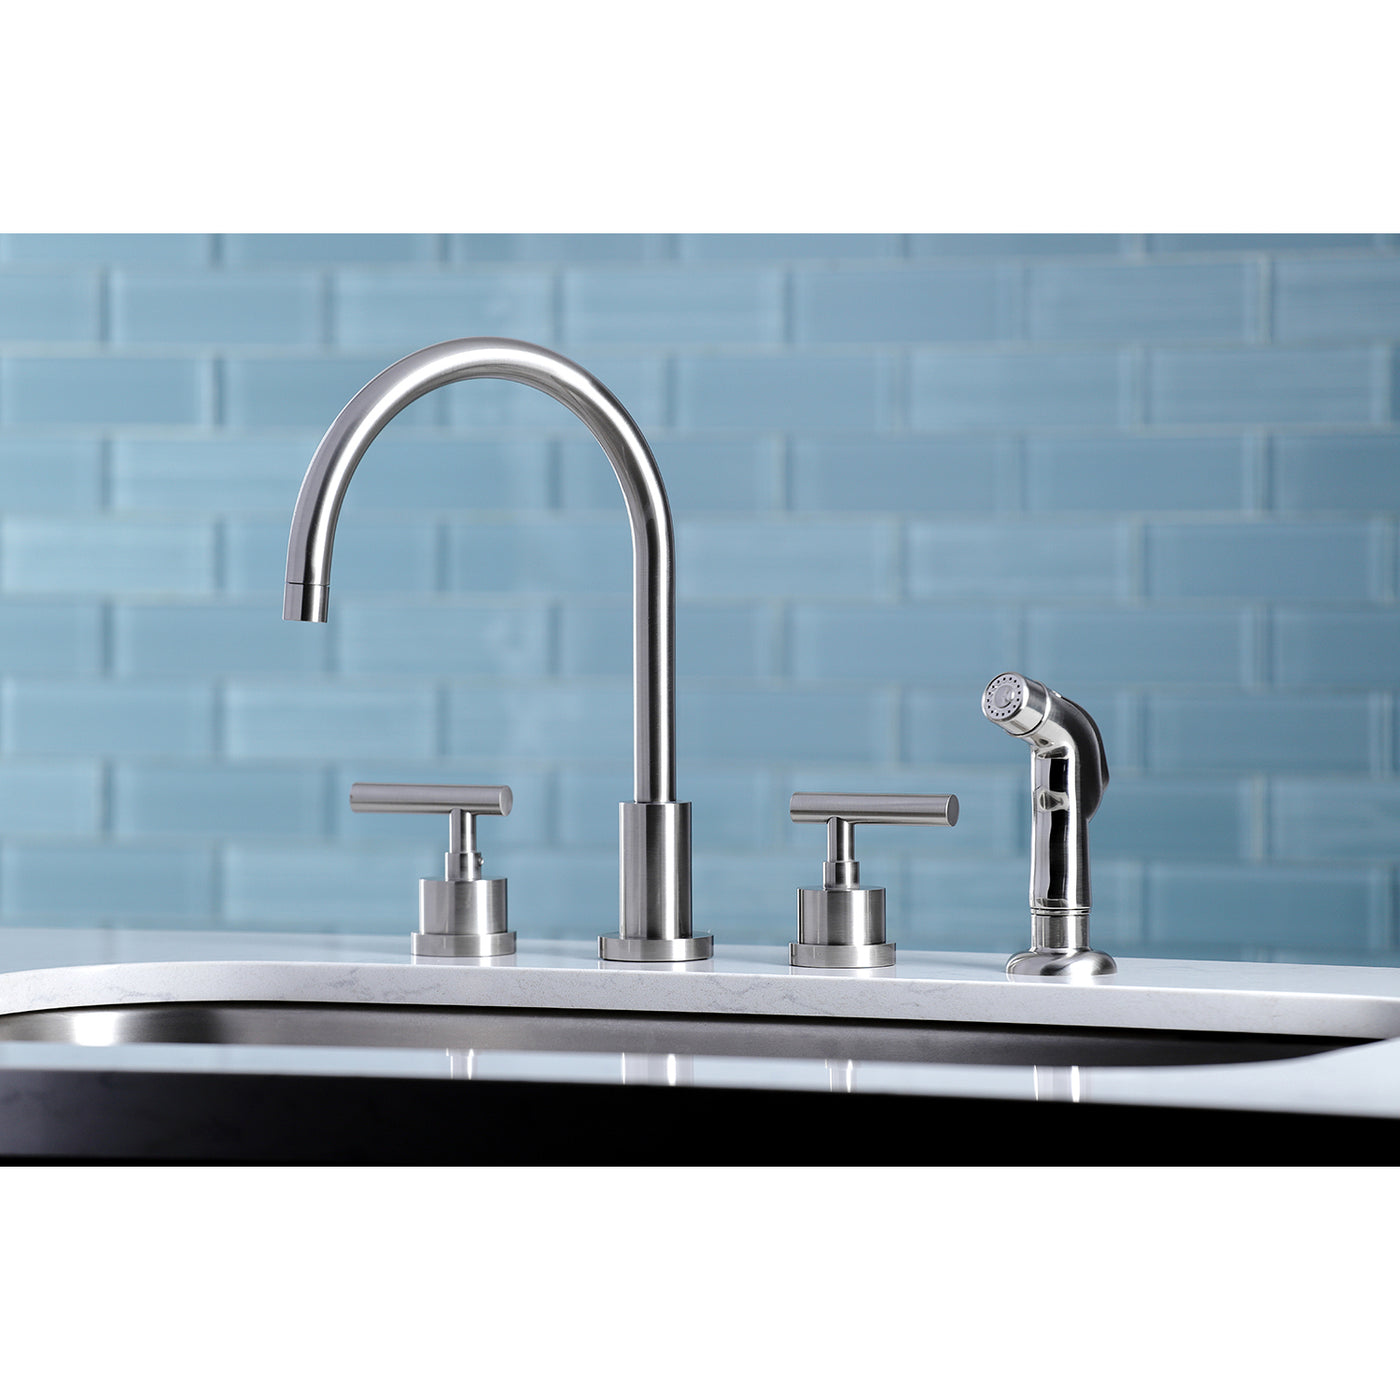 Elements of Design ES8728CML Widespread Kitchen Faucet with Plastic Sprayer, Brushed Nickel